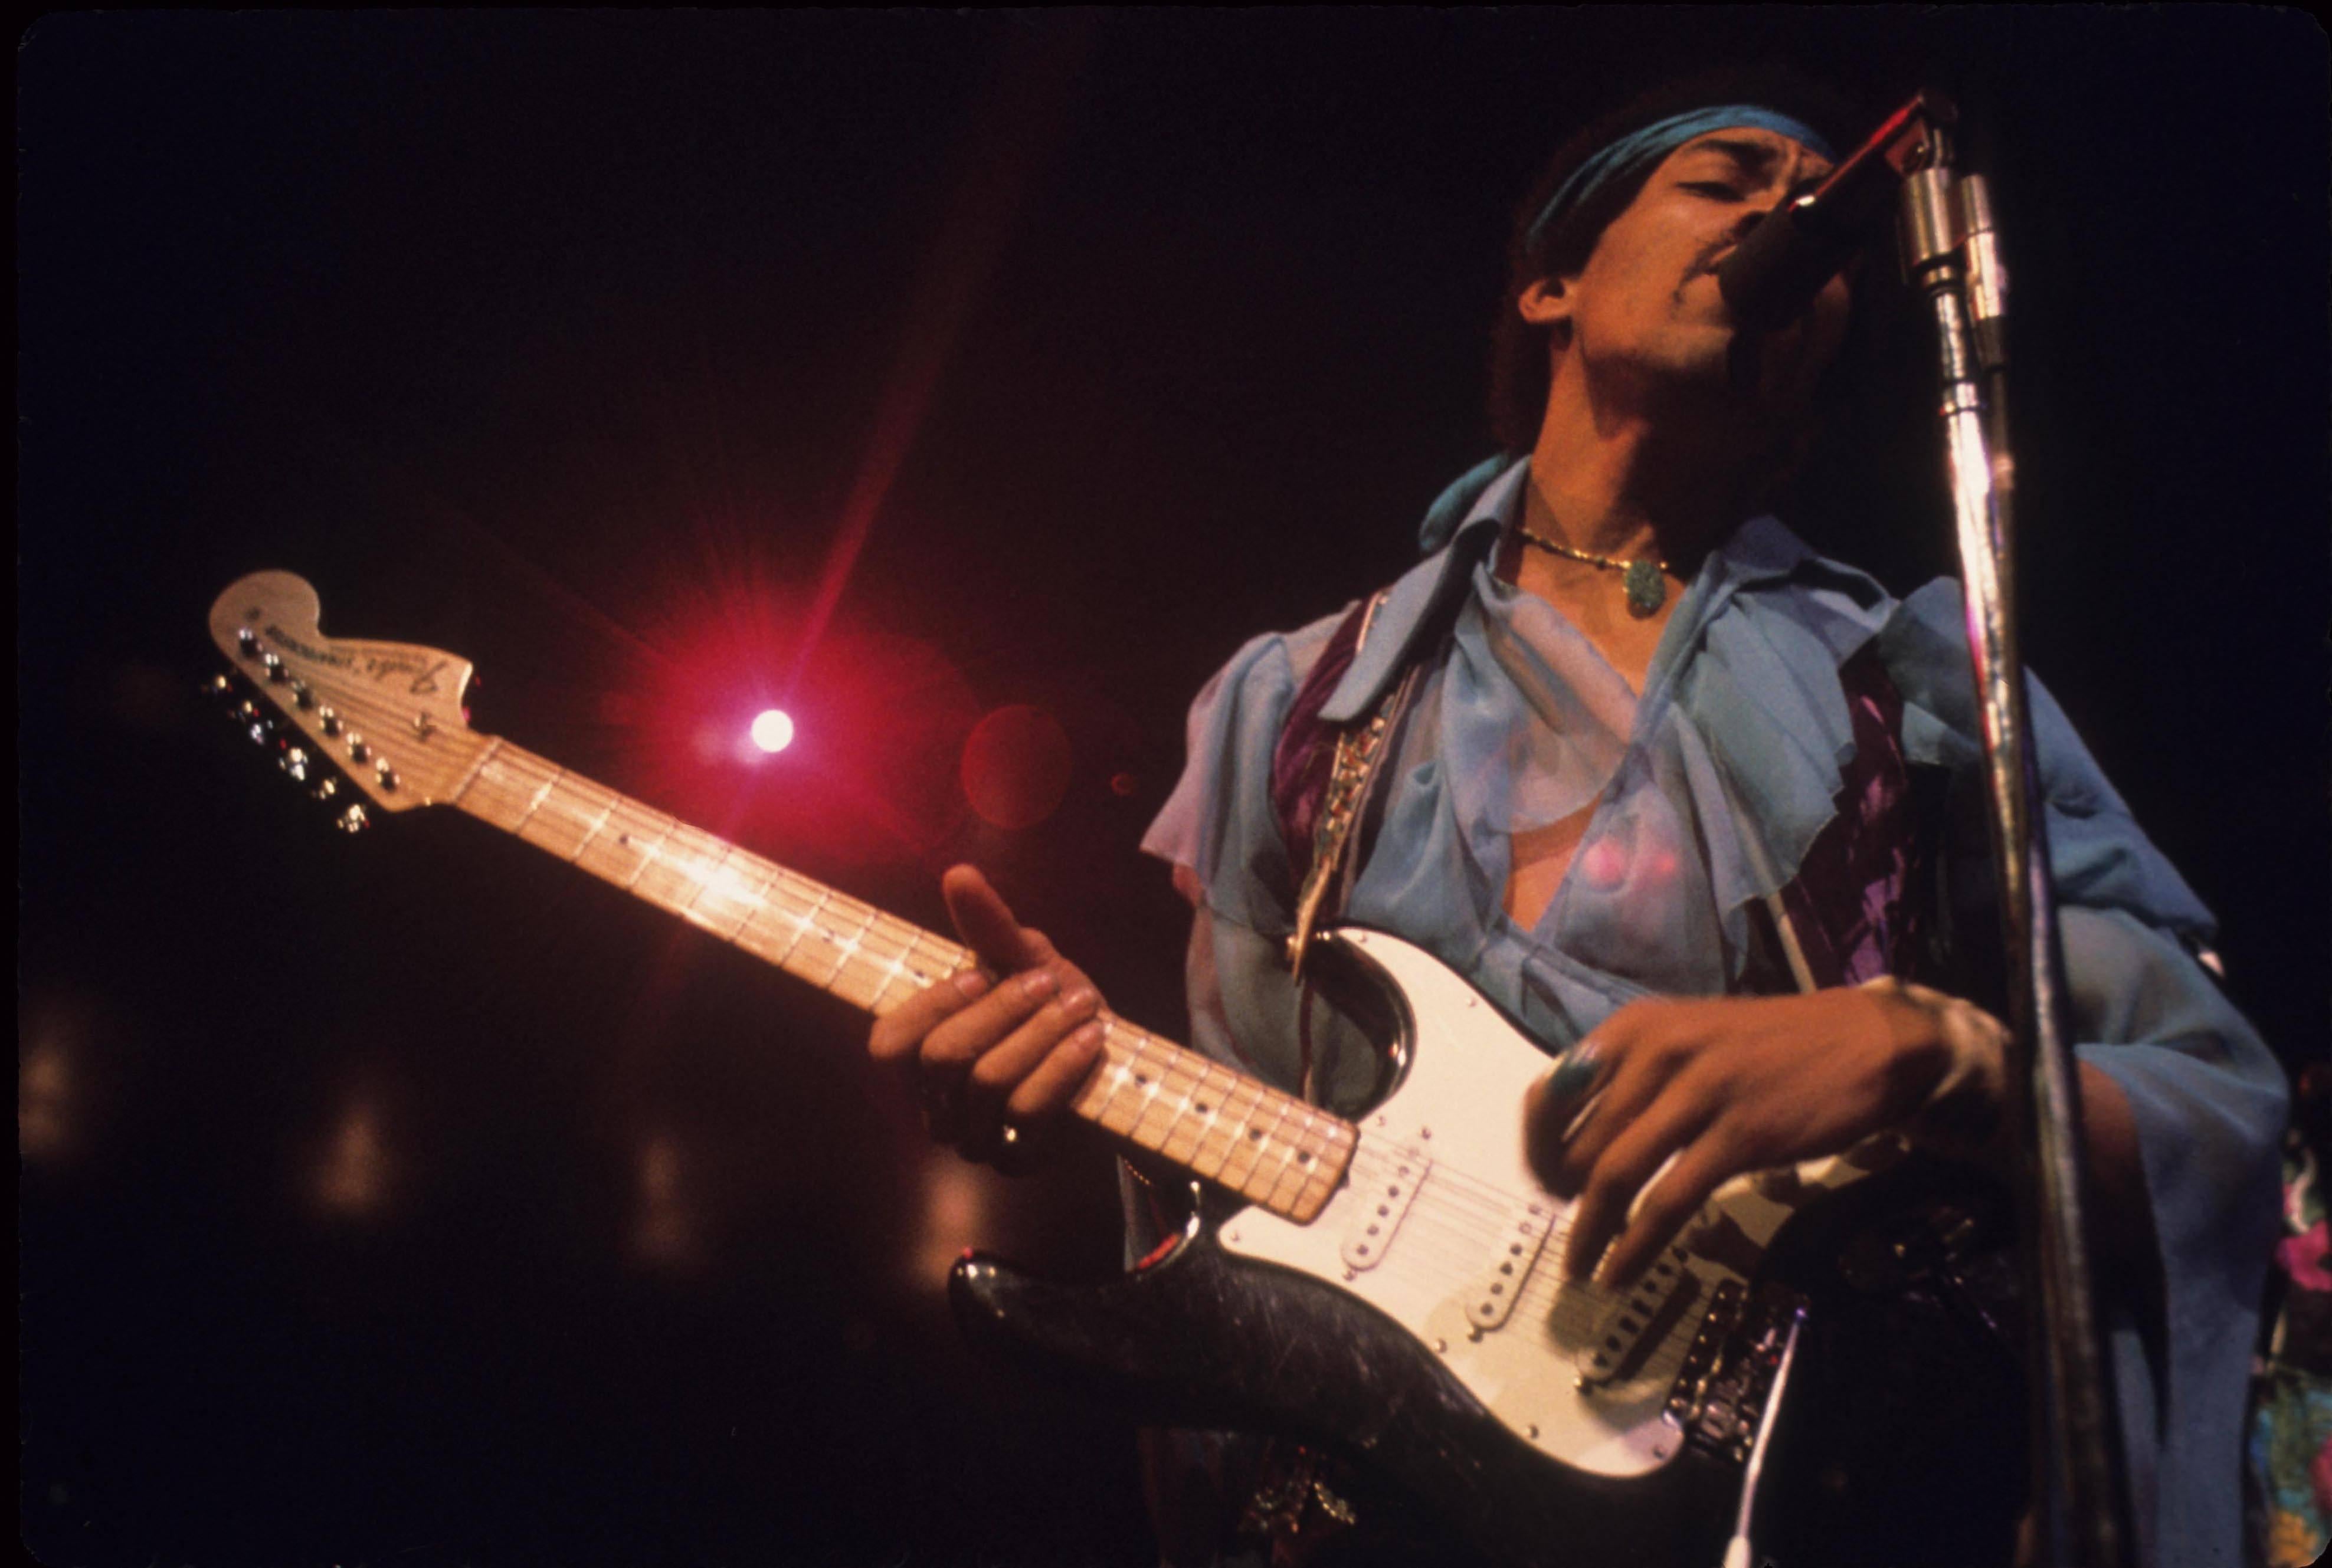 Walter Iooss Color Photograph - Jimi Hendrix on Stage in Blue Globe Photos Fine Art Print